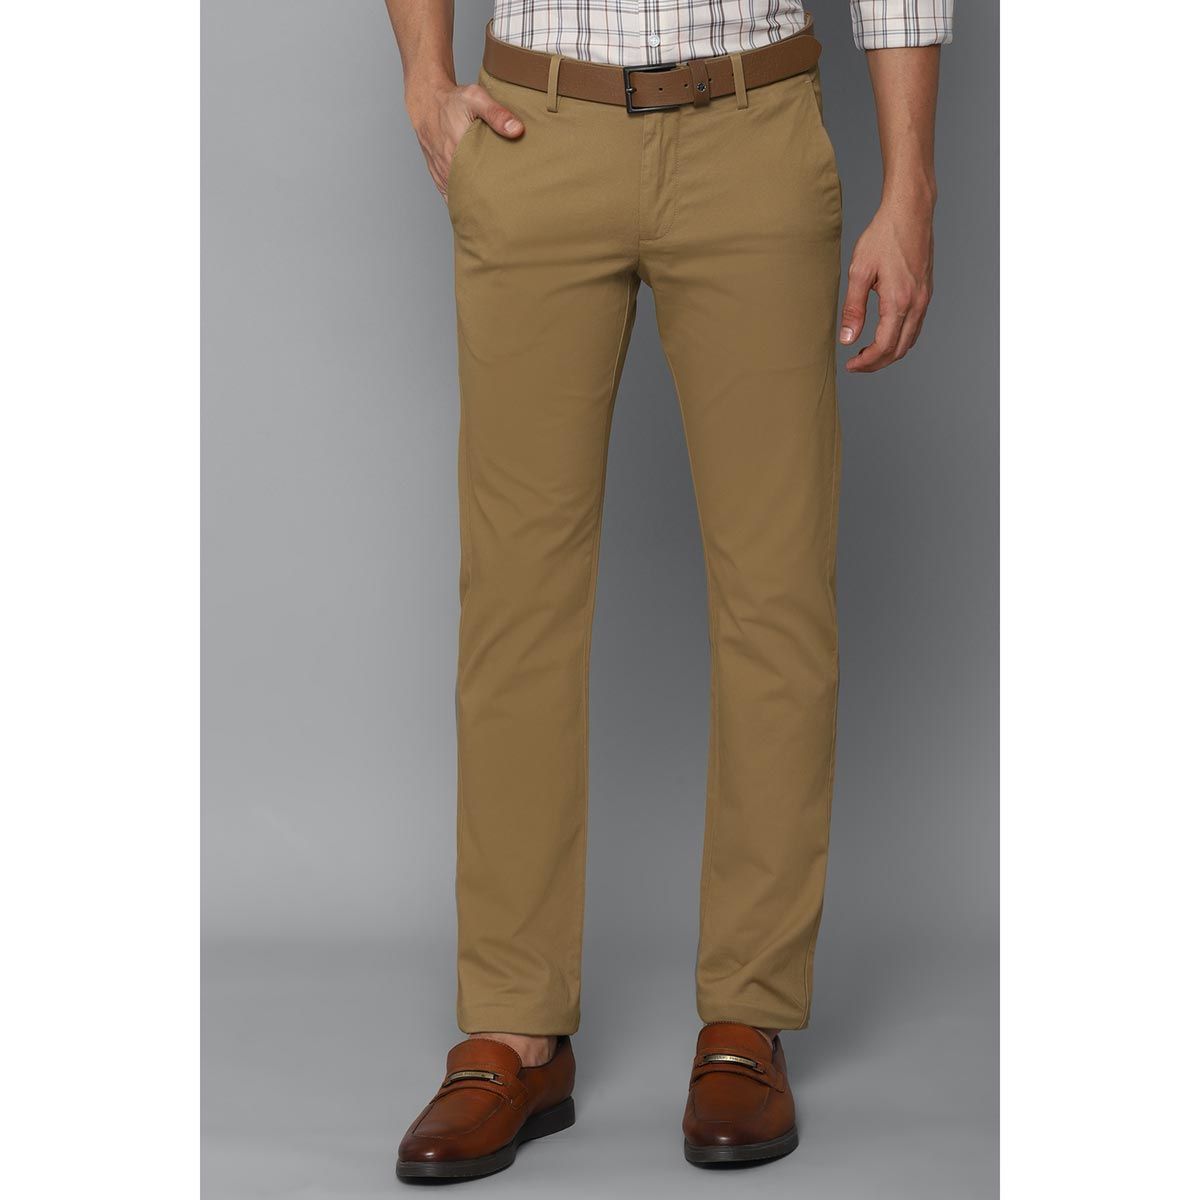 Buy ALLEN SOLLY Olive Mens 4 Pocket Solid Trousers | Shoppers Stop